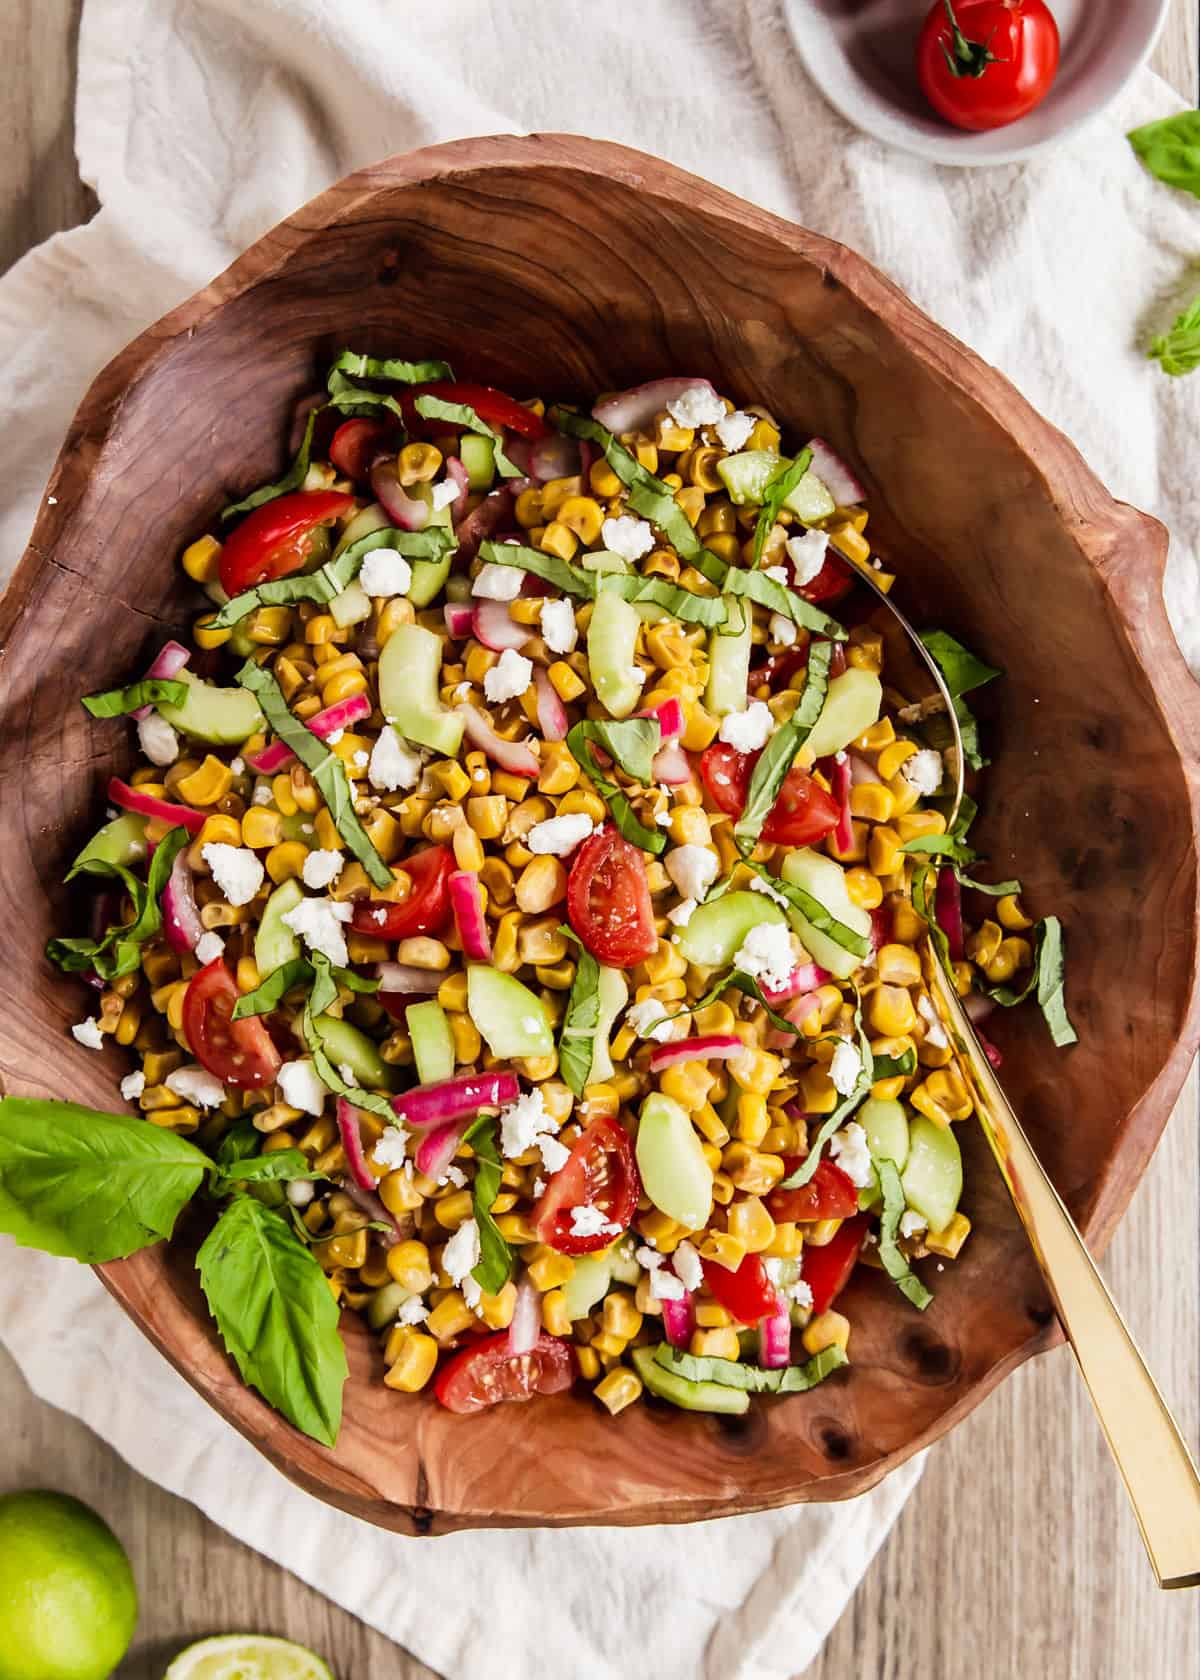 corn salad with tomatoes, cucumbers and fresh basil in wood serving bowl.